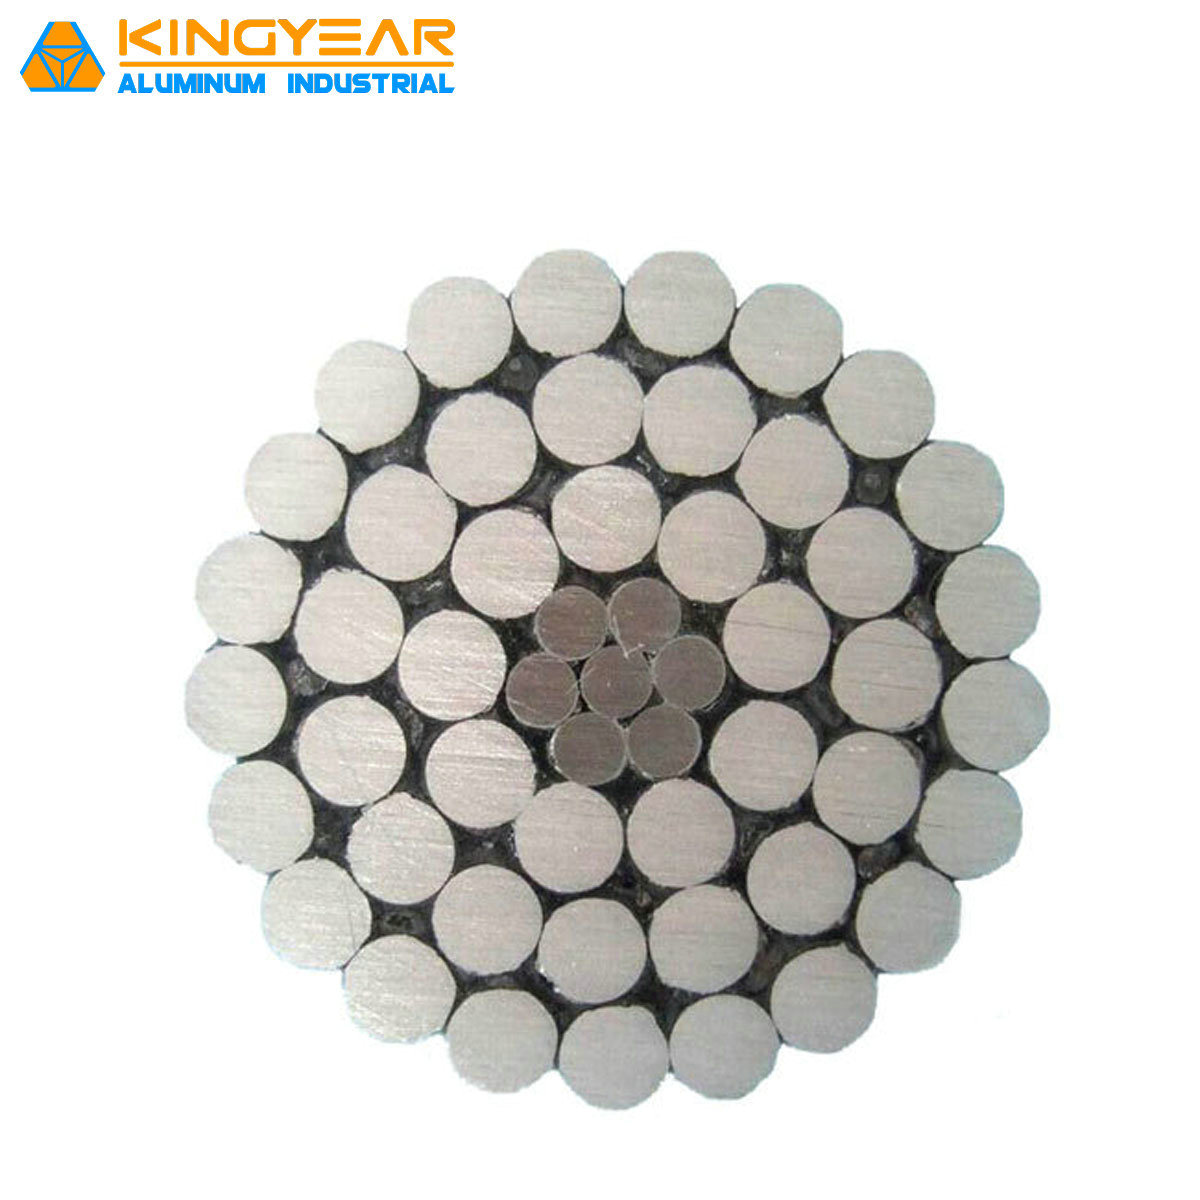 Steel Reinforced Conductor Aluminum Conductor Steel Reinforced Bare Aluminum Cable ACSR Conductor